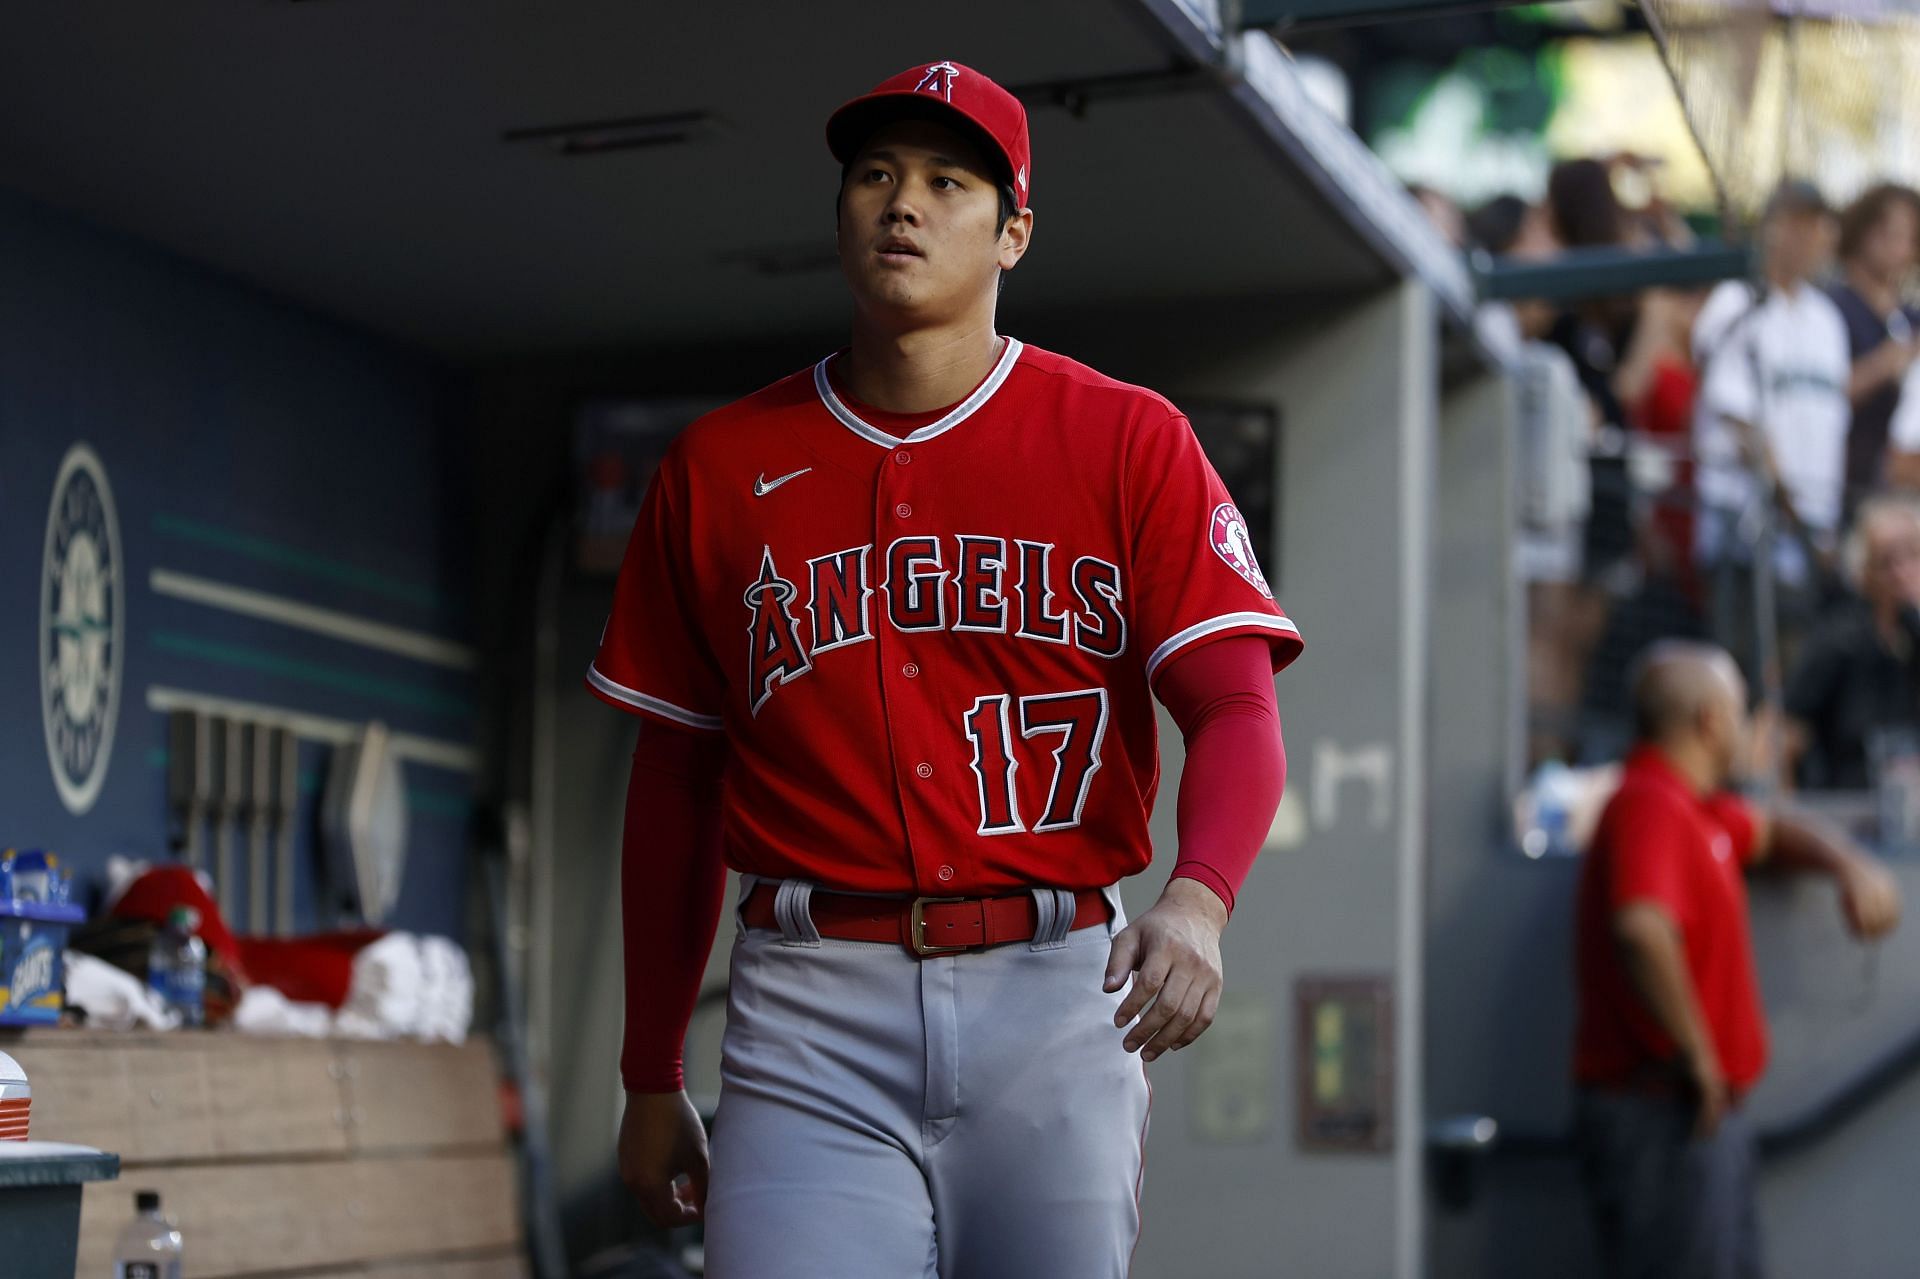 Shohei Ohtani of the Angels versus the Seattle Mariners